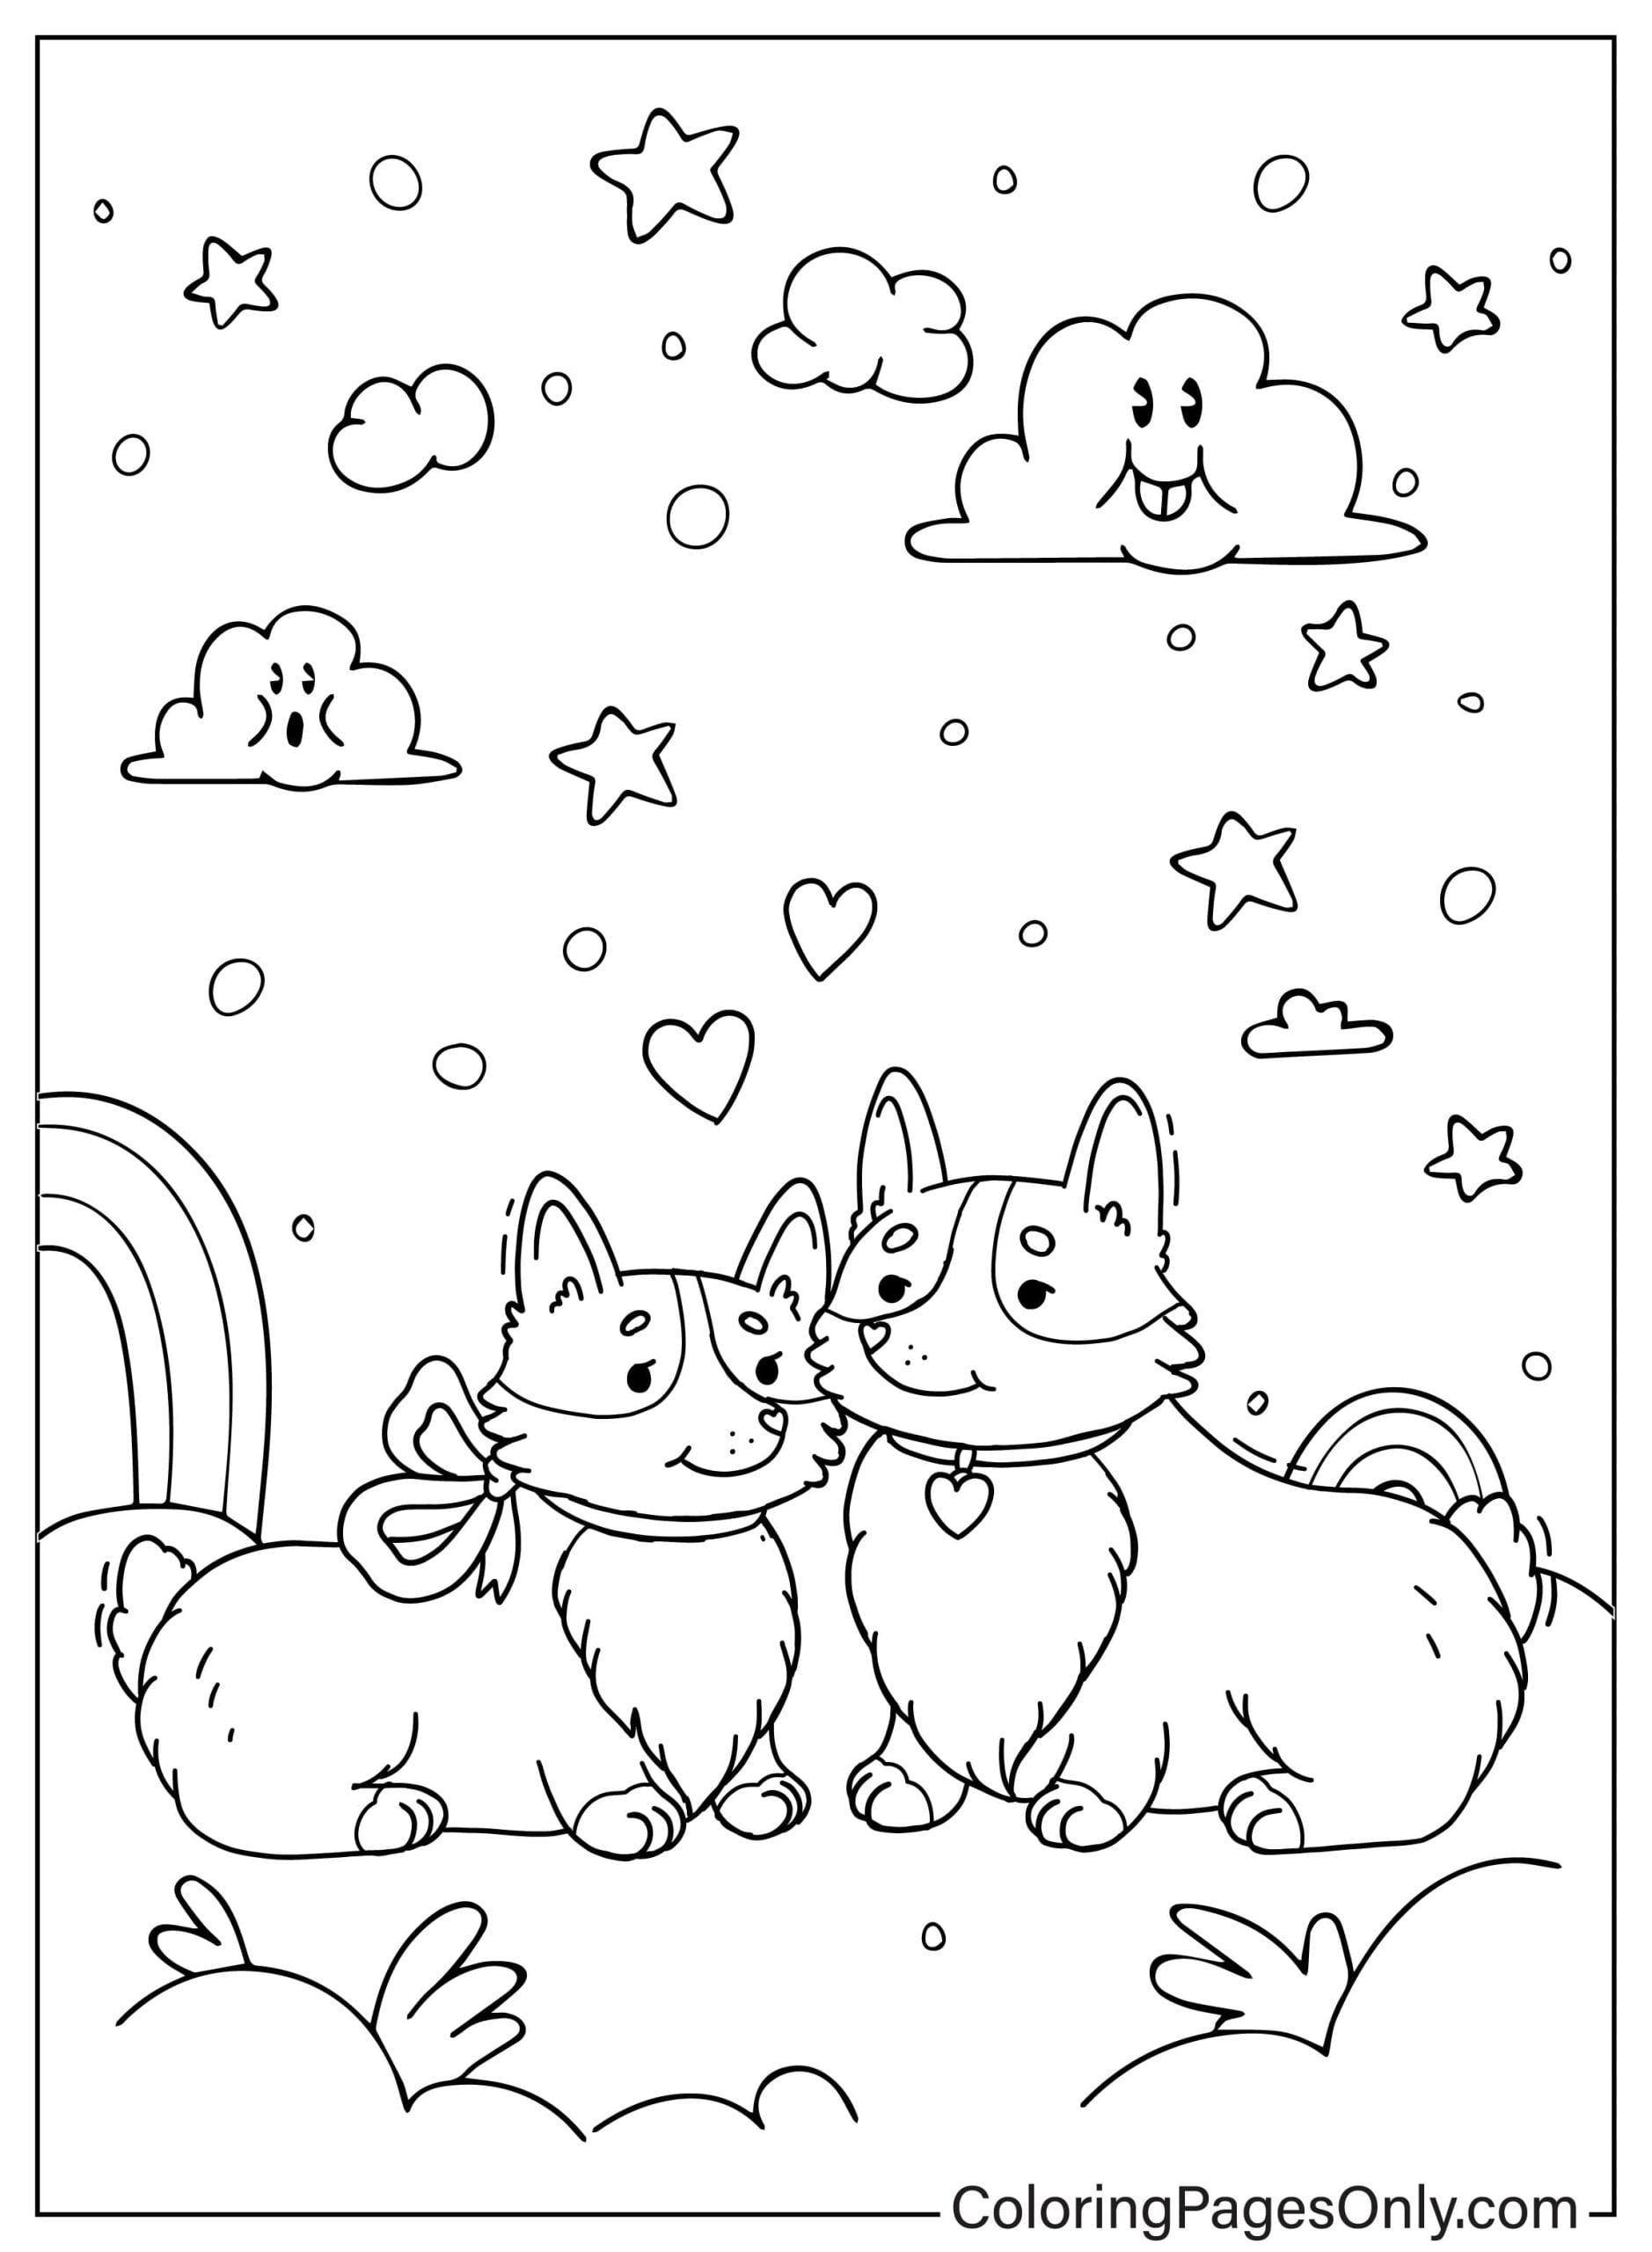 Two Corgi Dogs with Cute Clouds from Corgi